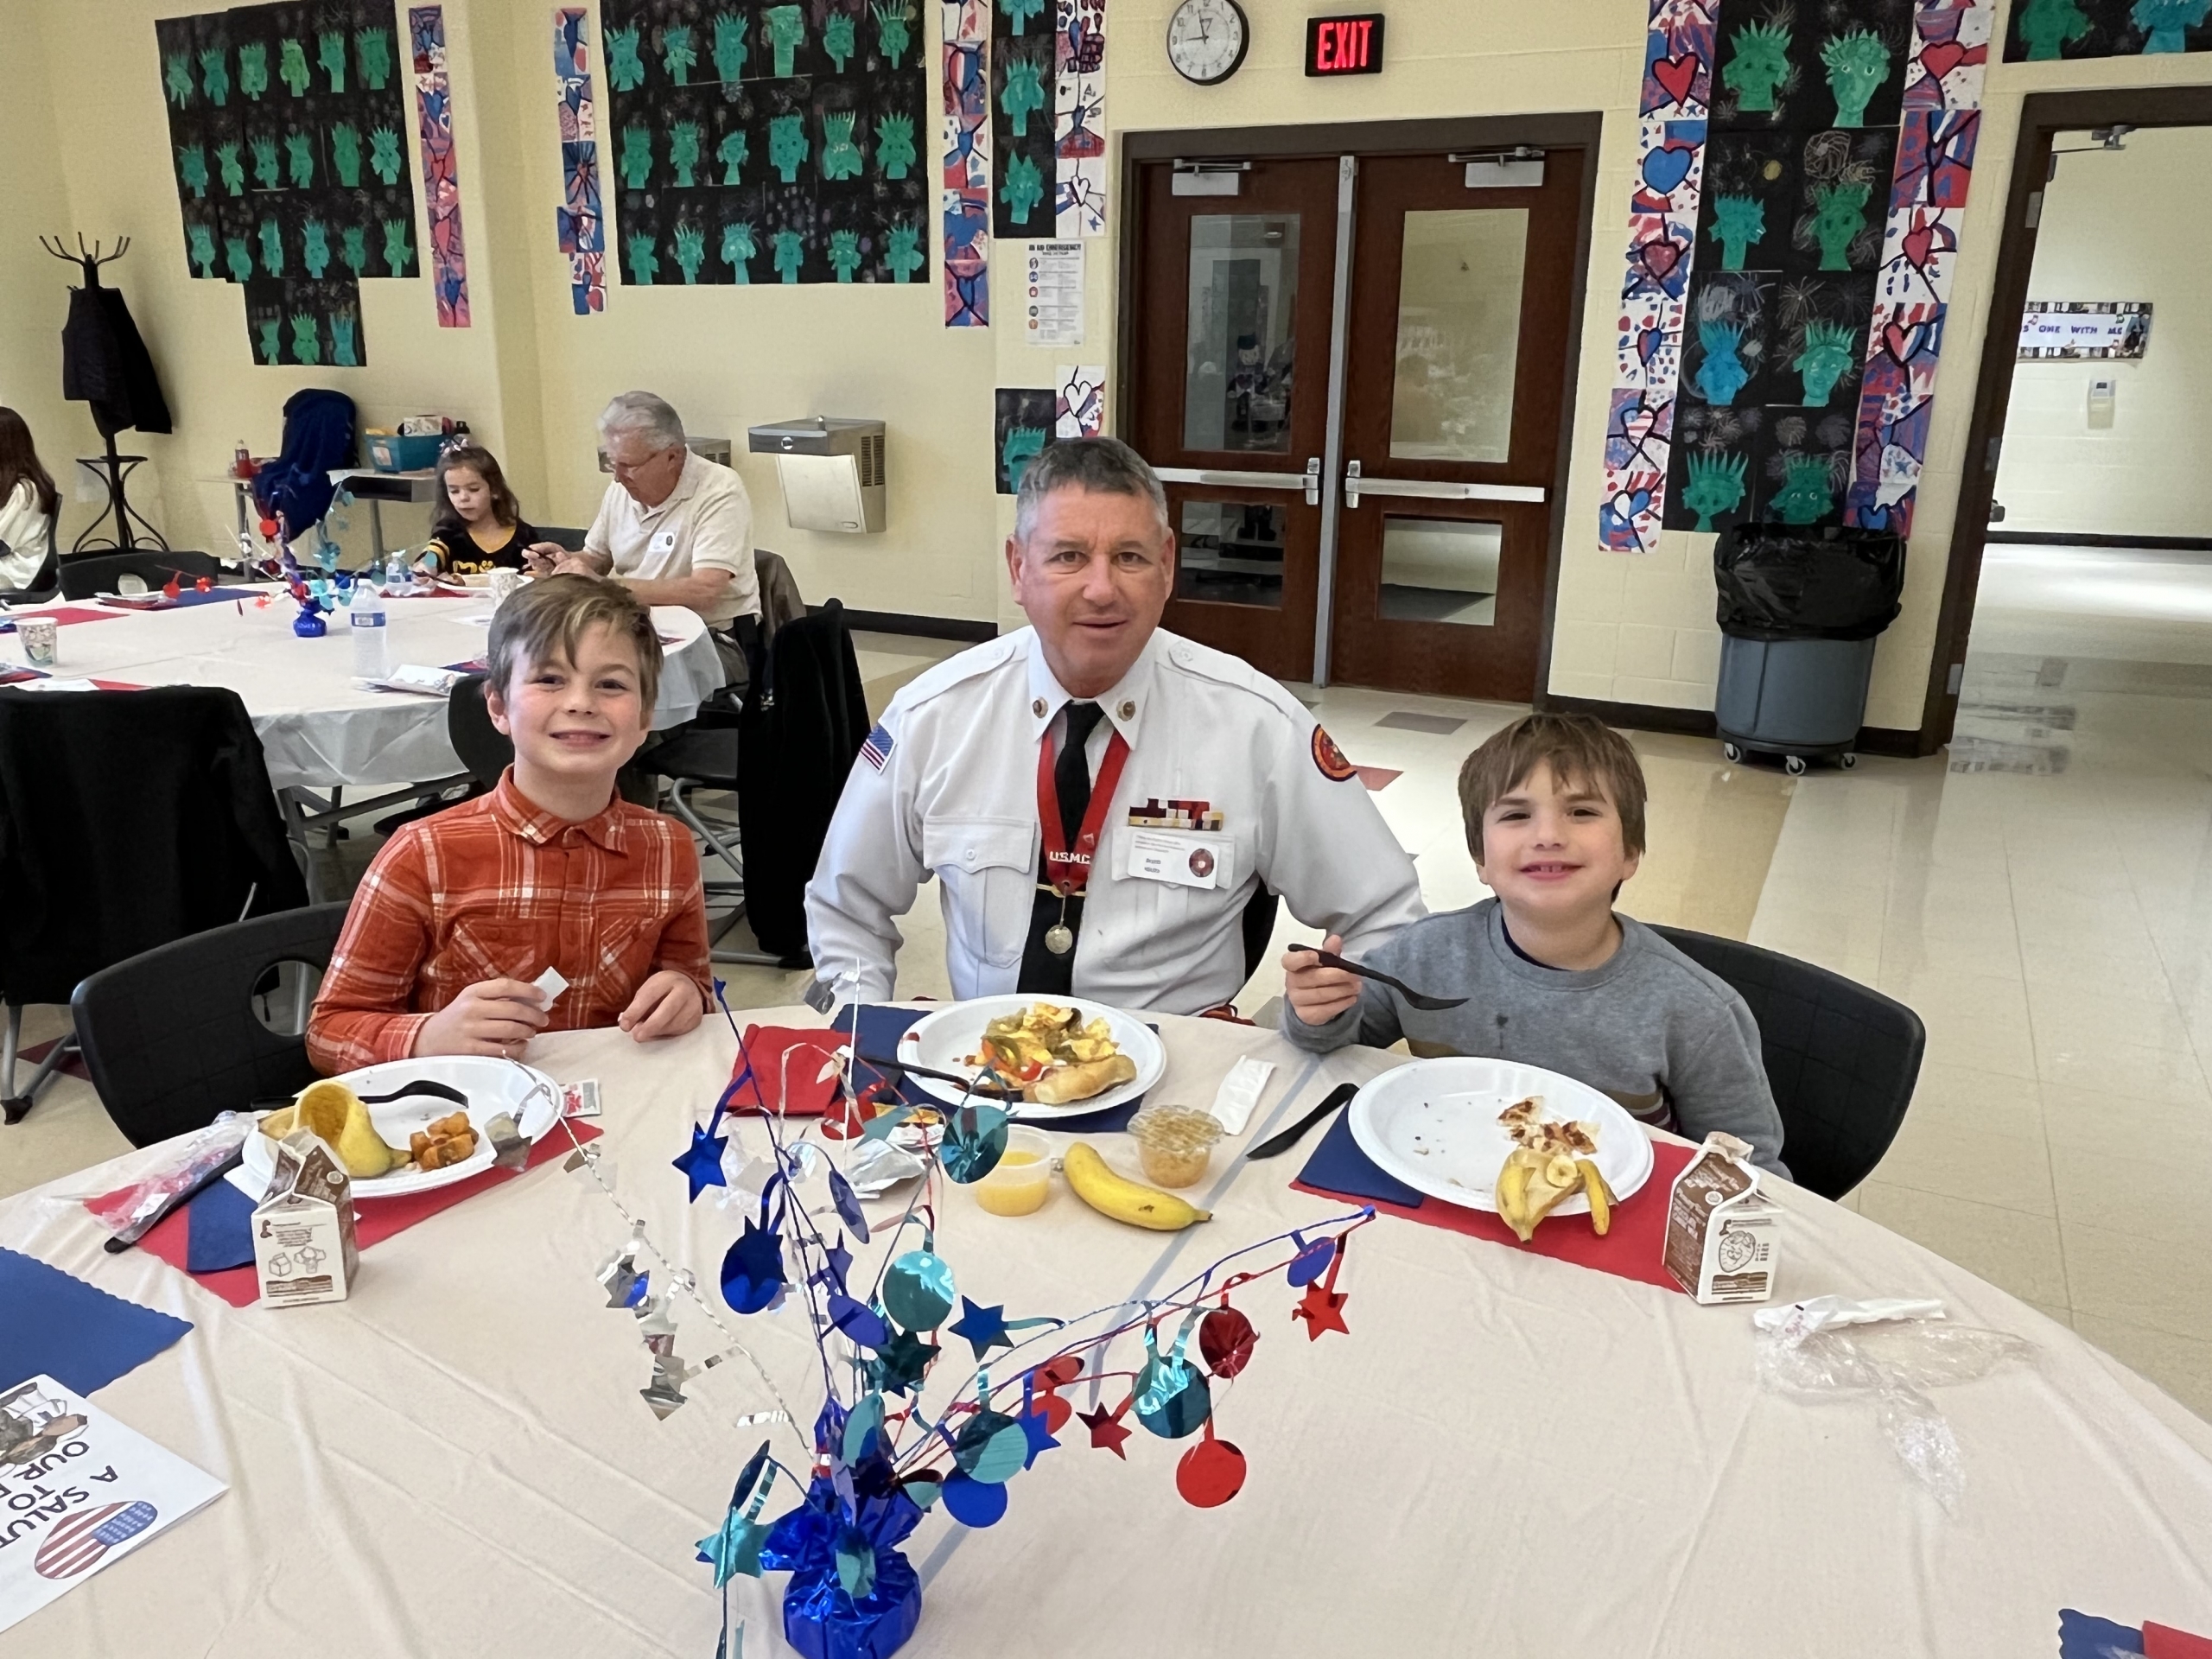 On Veterans Day, Mr. Hicks, a Marine veteran, enjoyed breakfast with his grandsons, Dean and Daniel Perez.